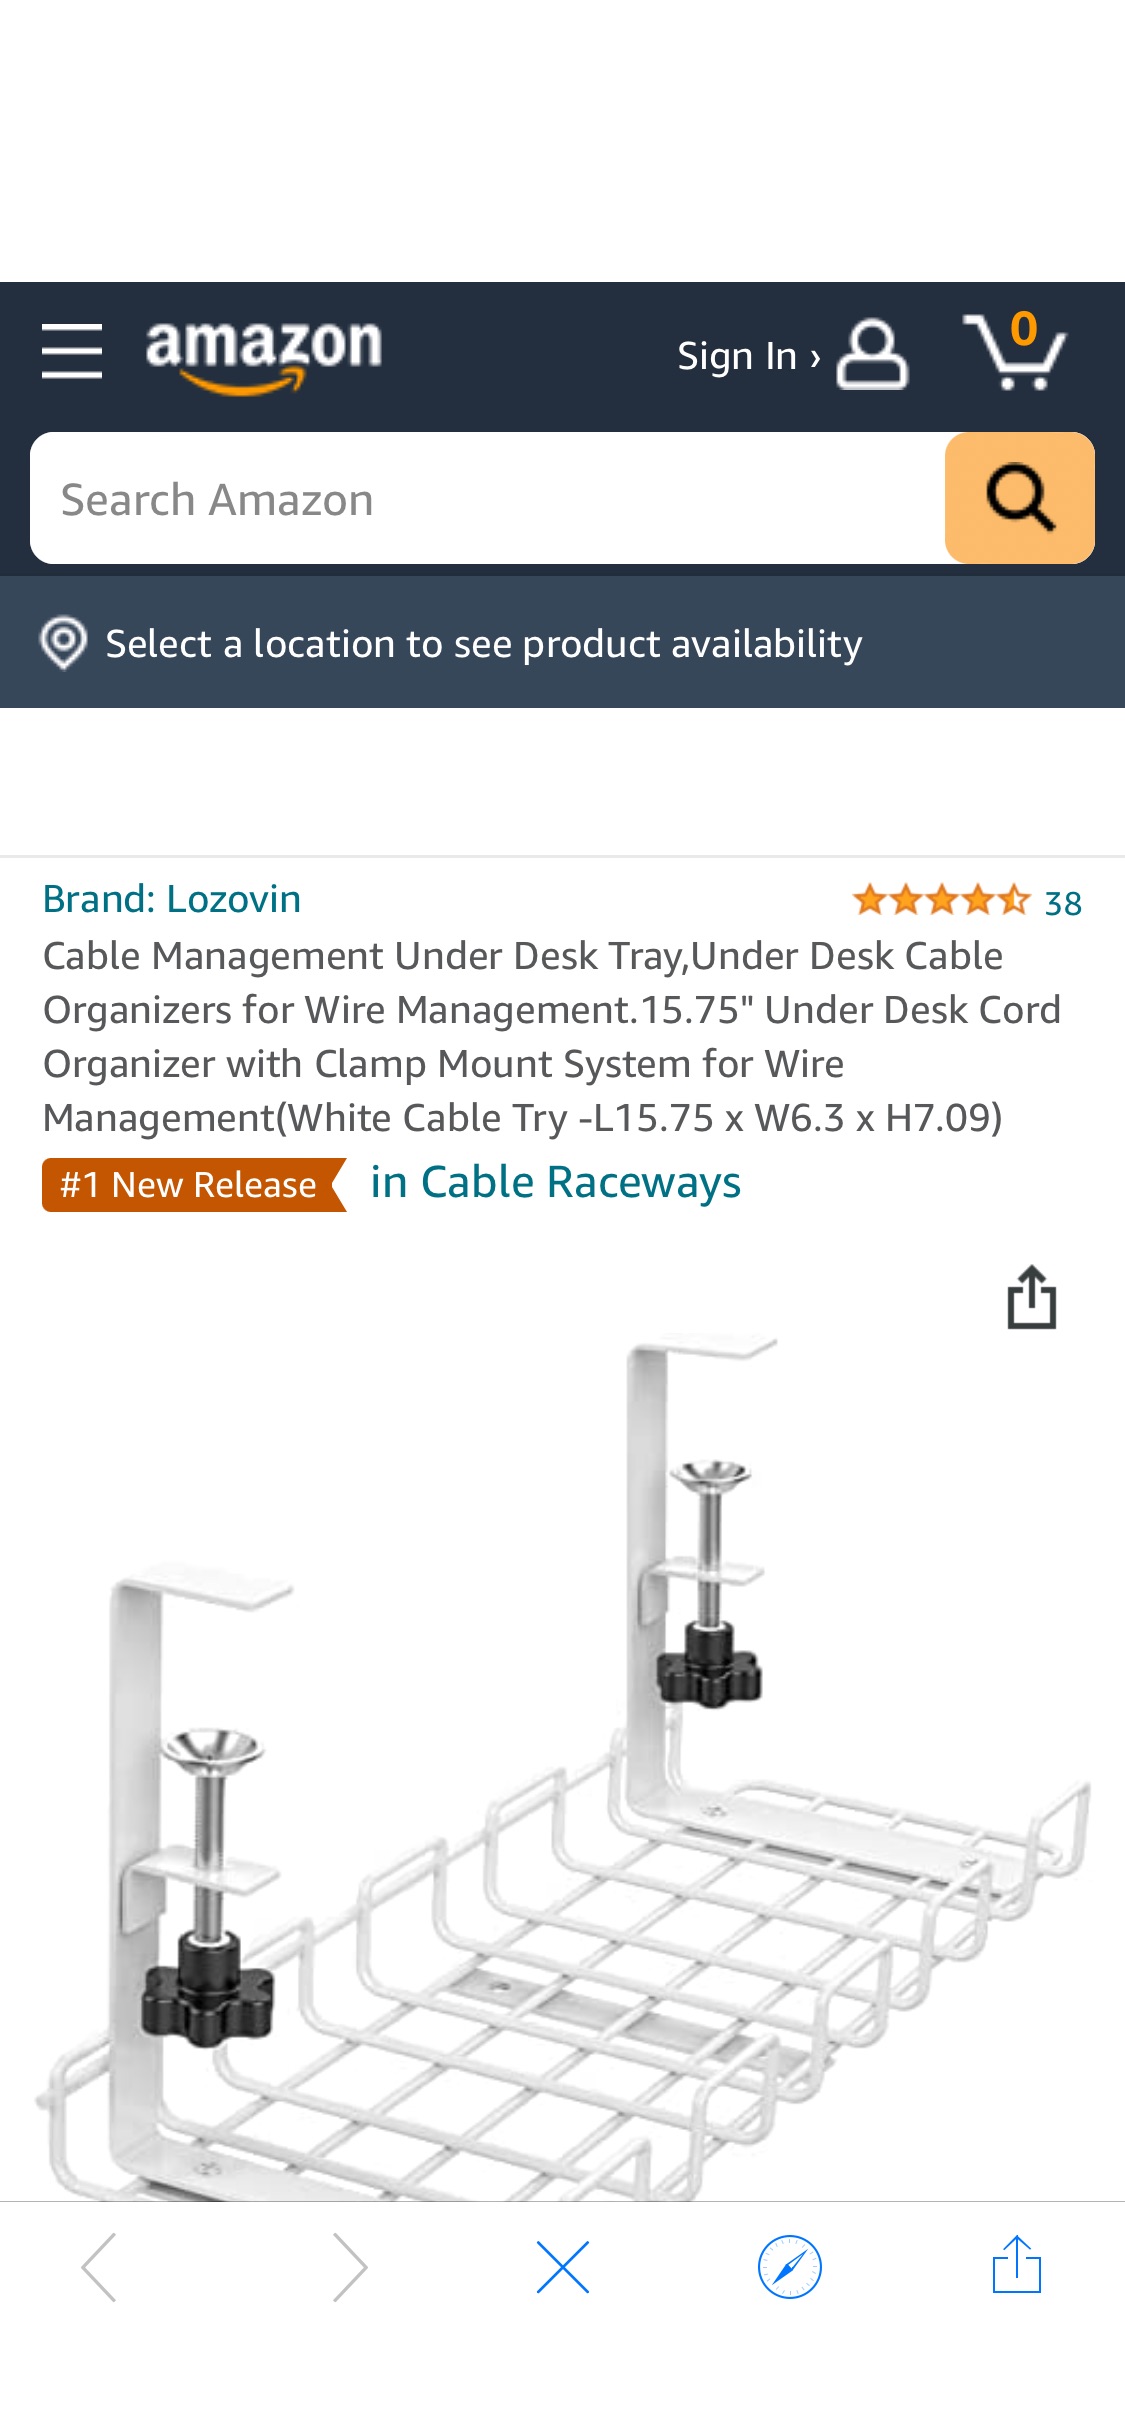 Amazon.com: Cable Management Under Desk Tray,Under Desk Cable Organizers for Wire Management.15.75" Under Desk Cord Organizer with Clamp Mount System for Wire Management